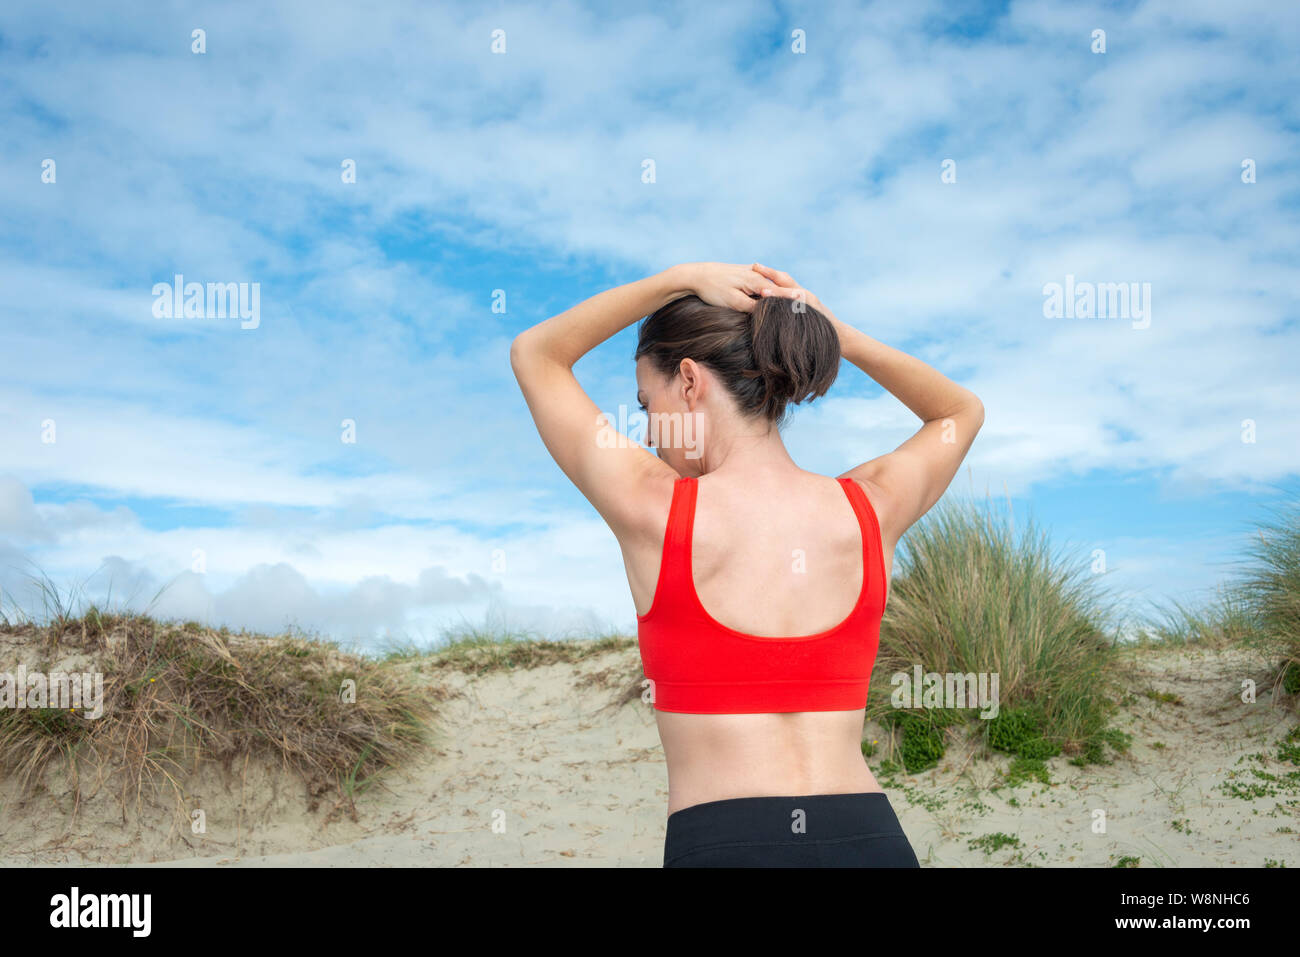 woman wearing a red sports bra adjusting her hair, back view. Stock Photo